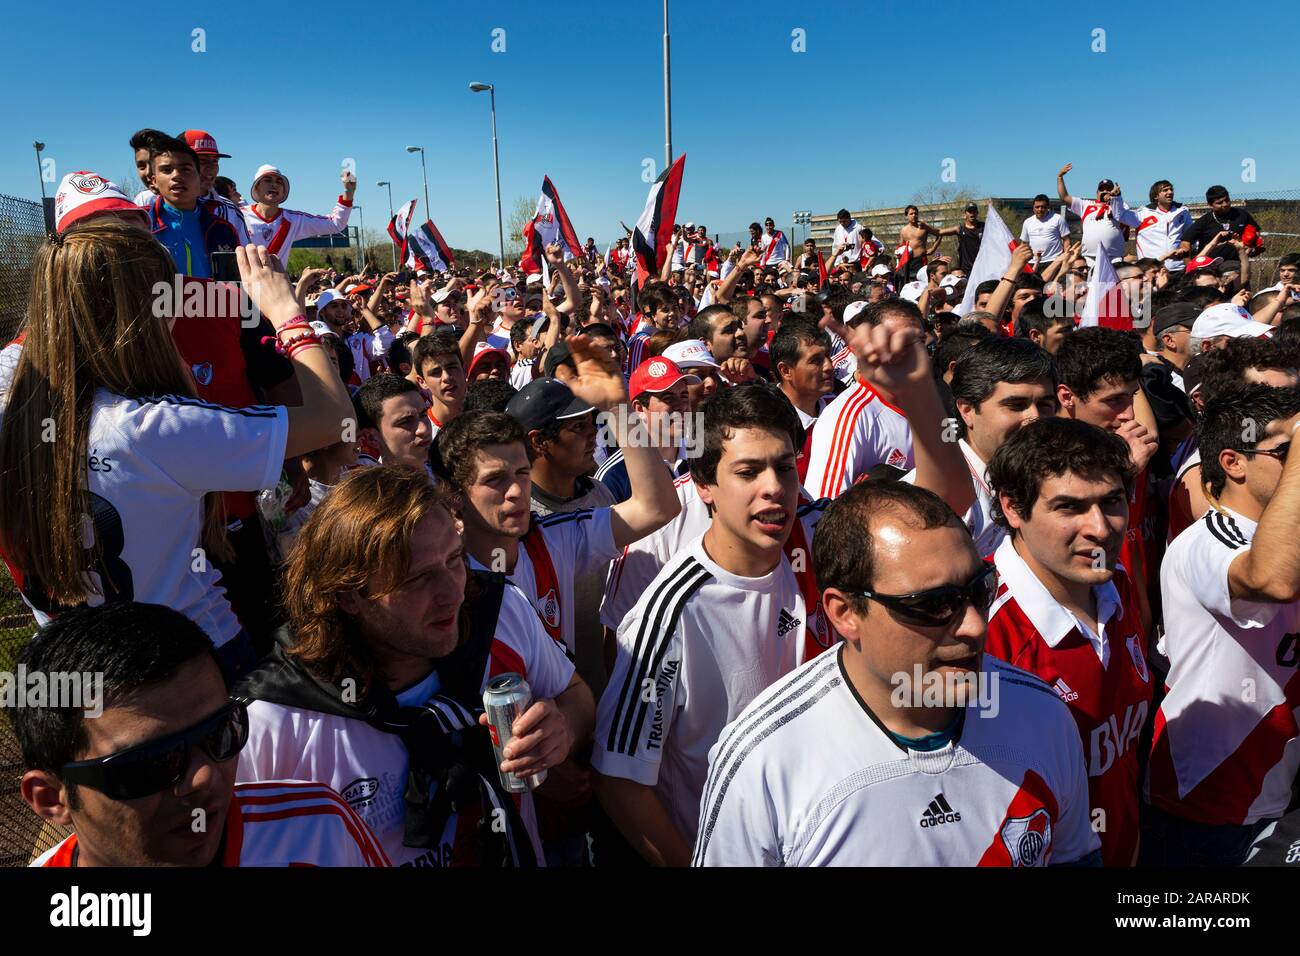 Buenos Aires, Argentina - October 6, 2013: River Plate supporters wait to enter the Estadio Monumental Antonio Vespucio Liberti for a soccer game in t Stock Photo